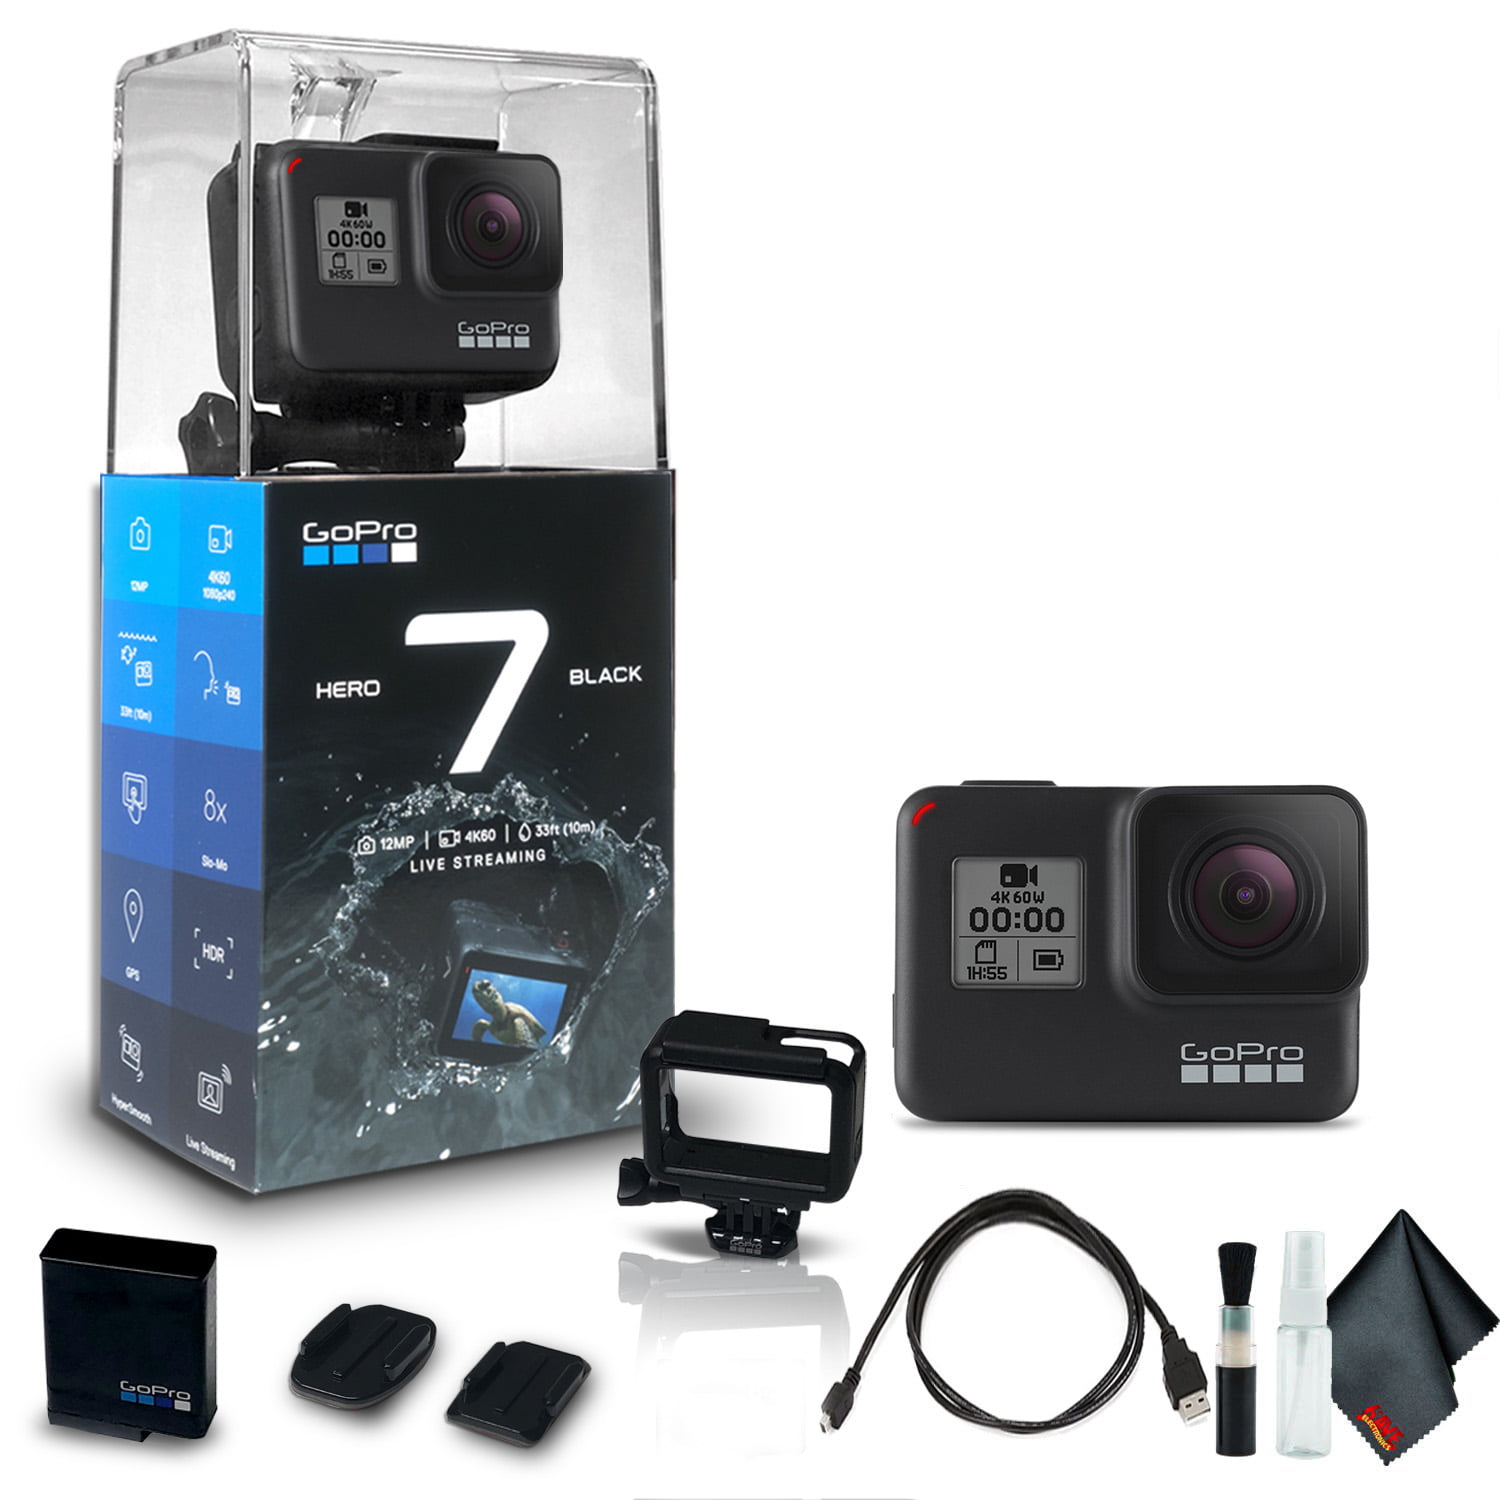 GoPro HERO7 Black - Waterproof Action Camera with Touch Screen, 4K HD  Video, 12MP Photos, Live Streaming and Stabilizati